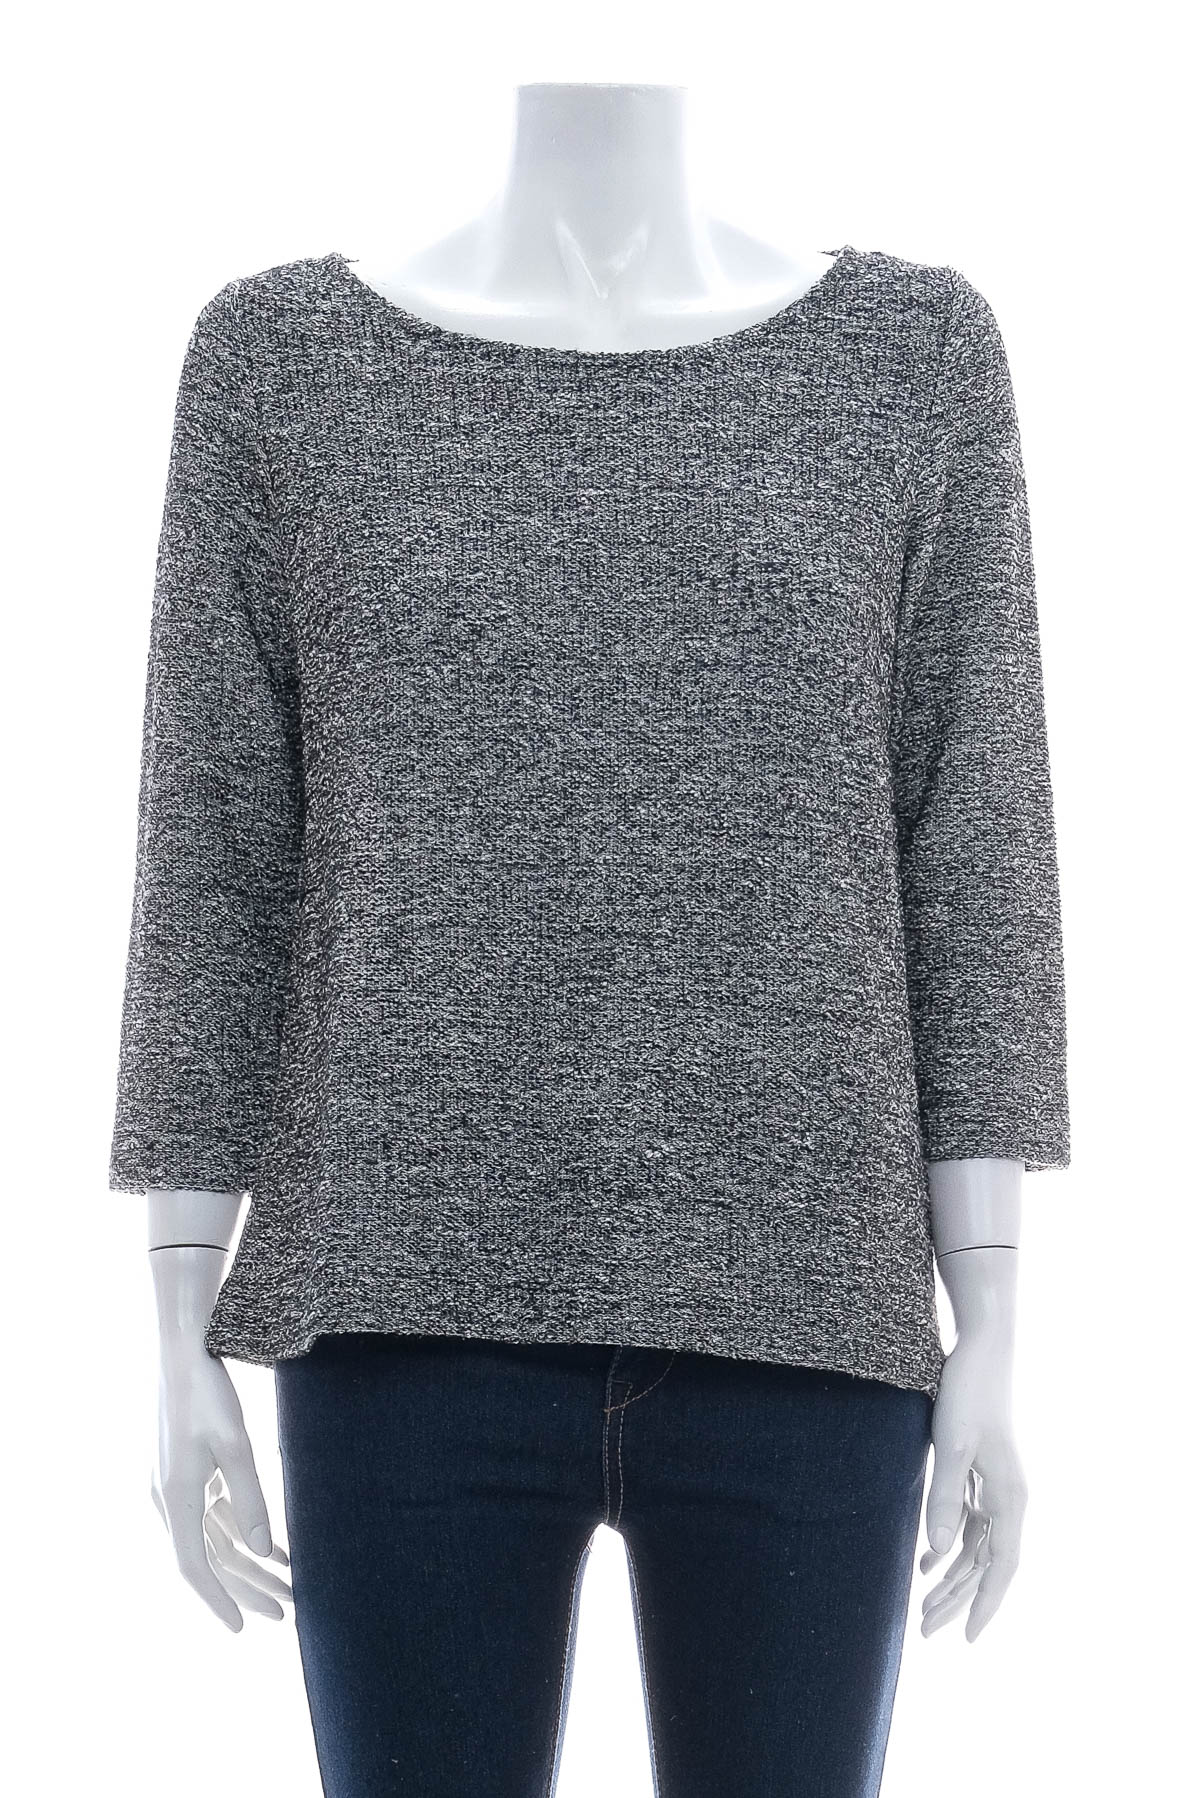 Women's sweater - RESERVED - 0